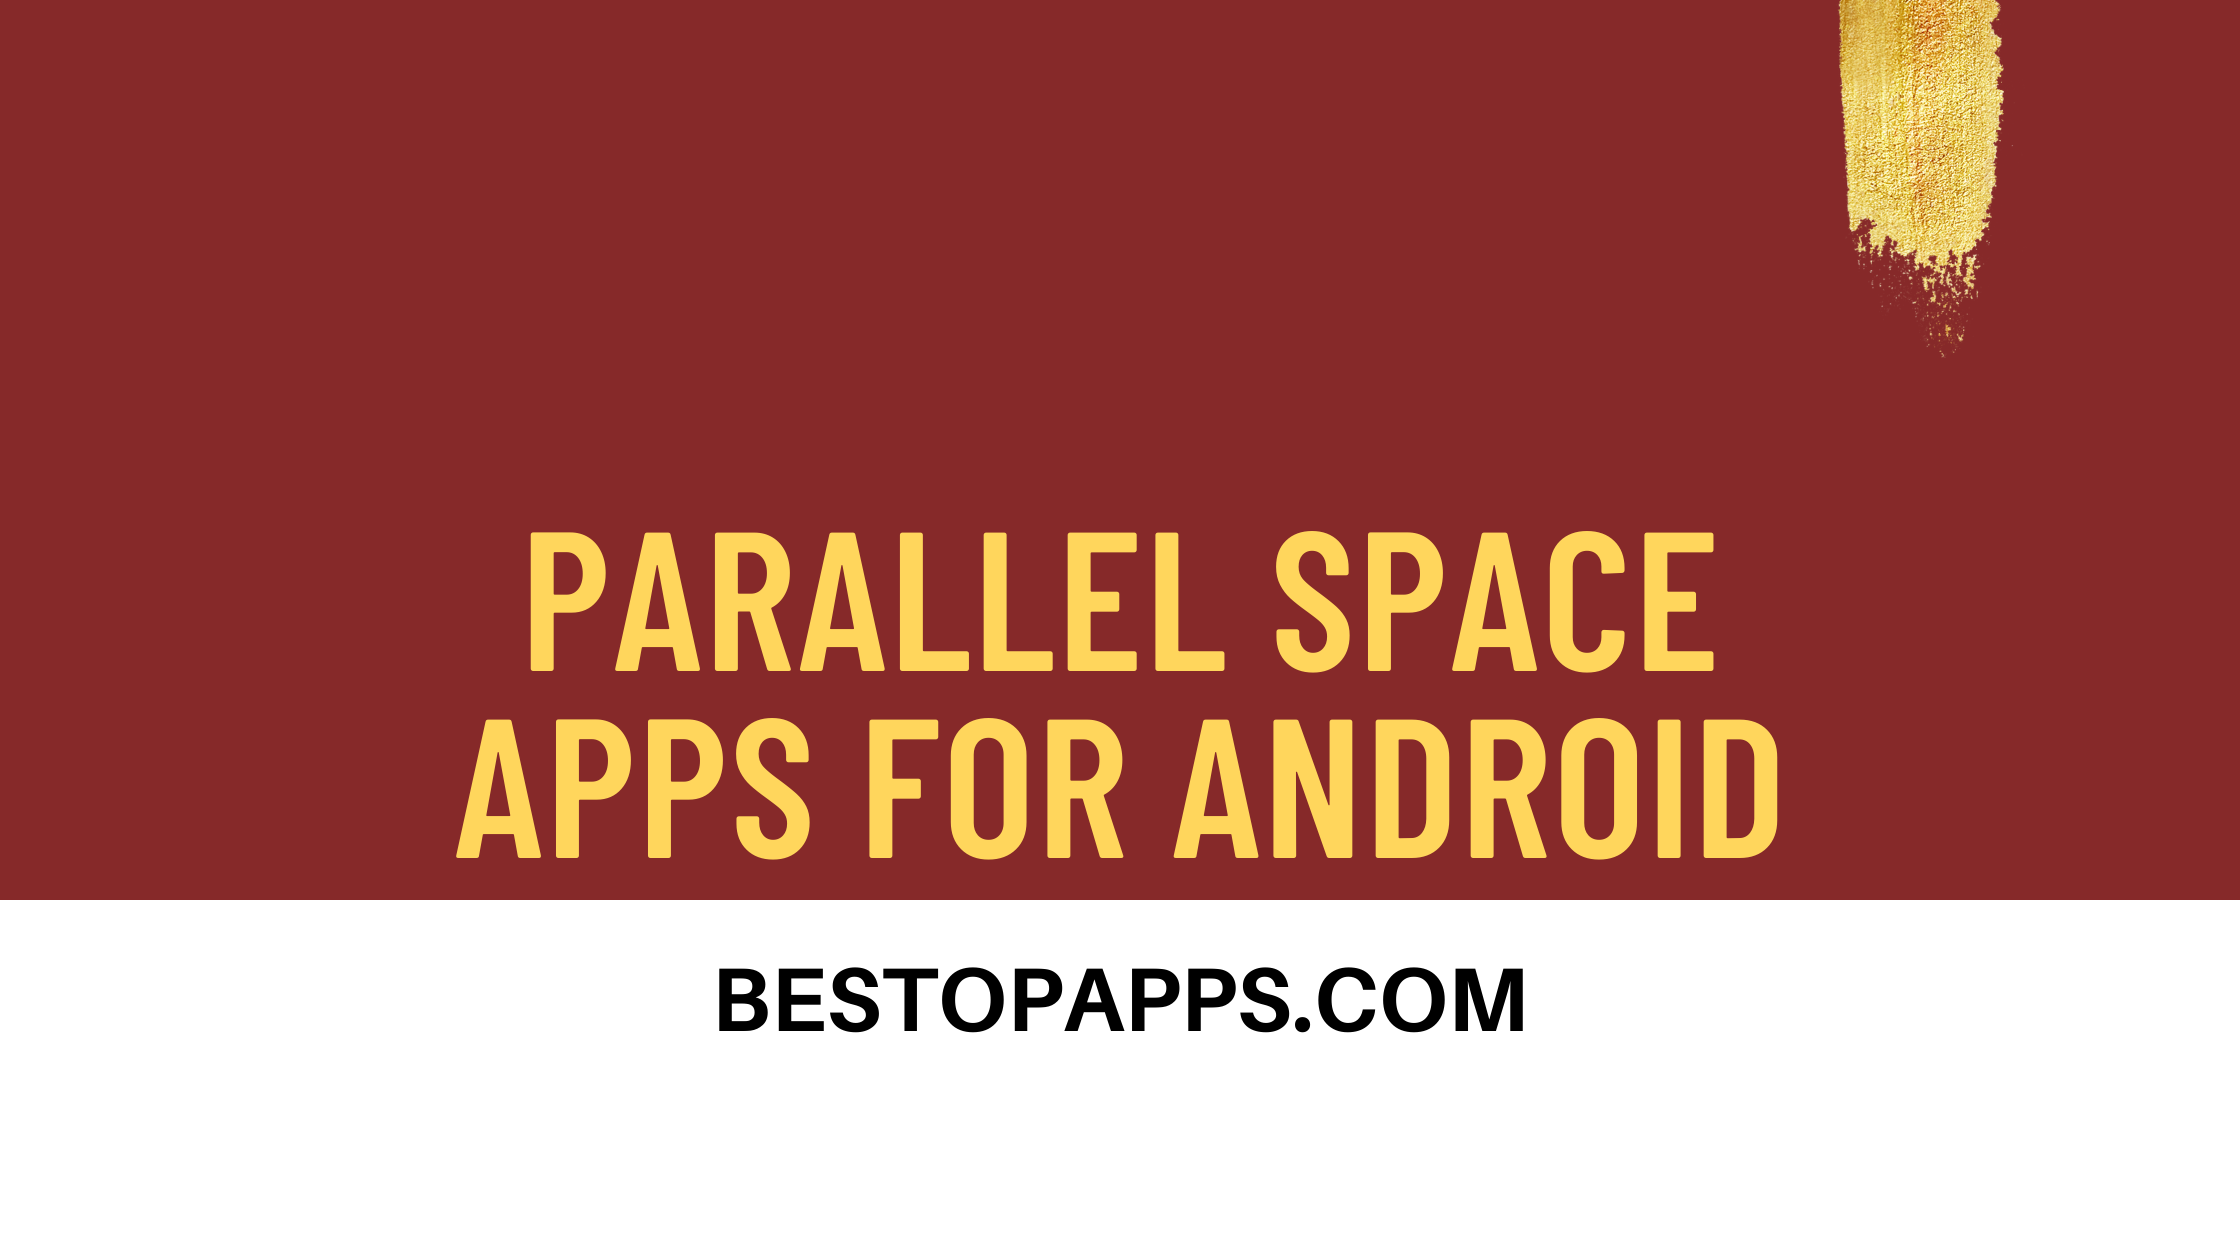 Parallel Space Apps for Android